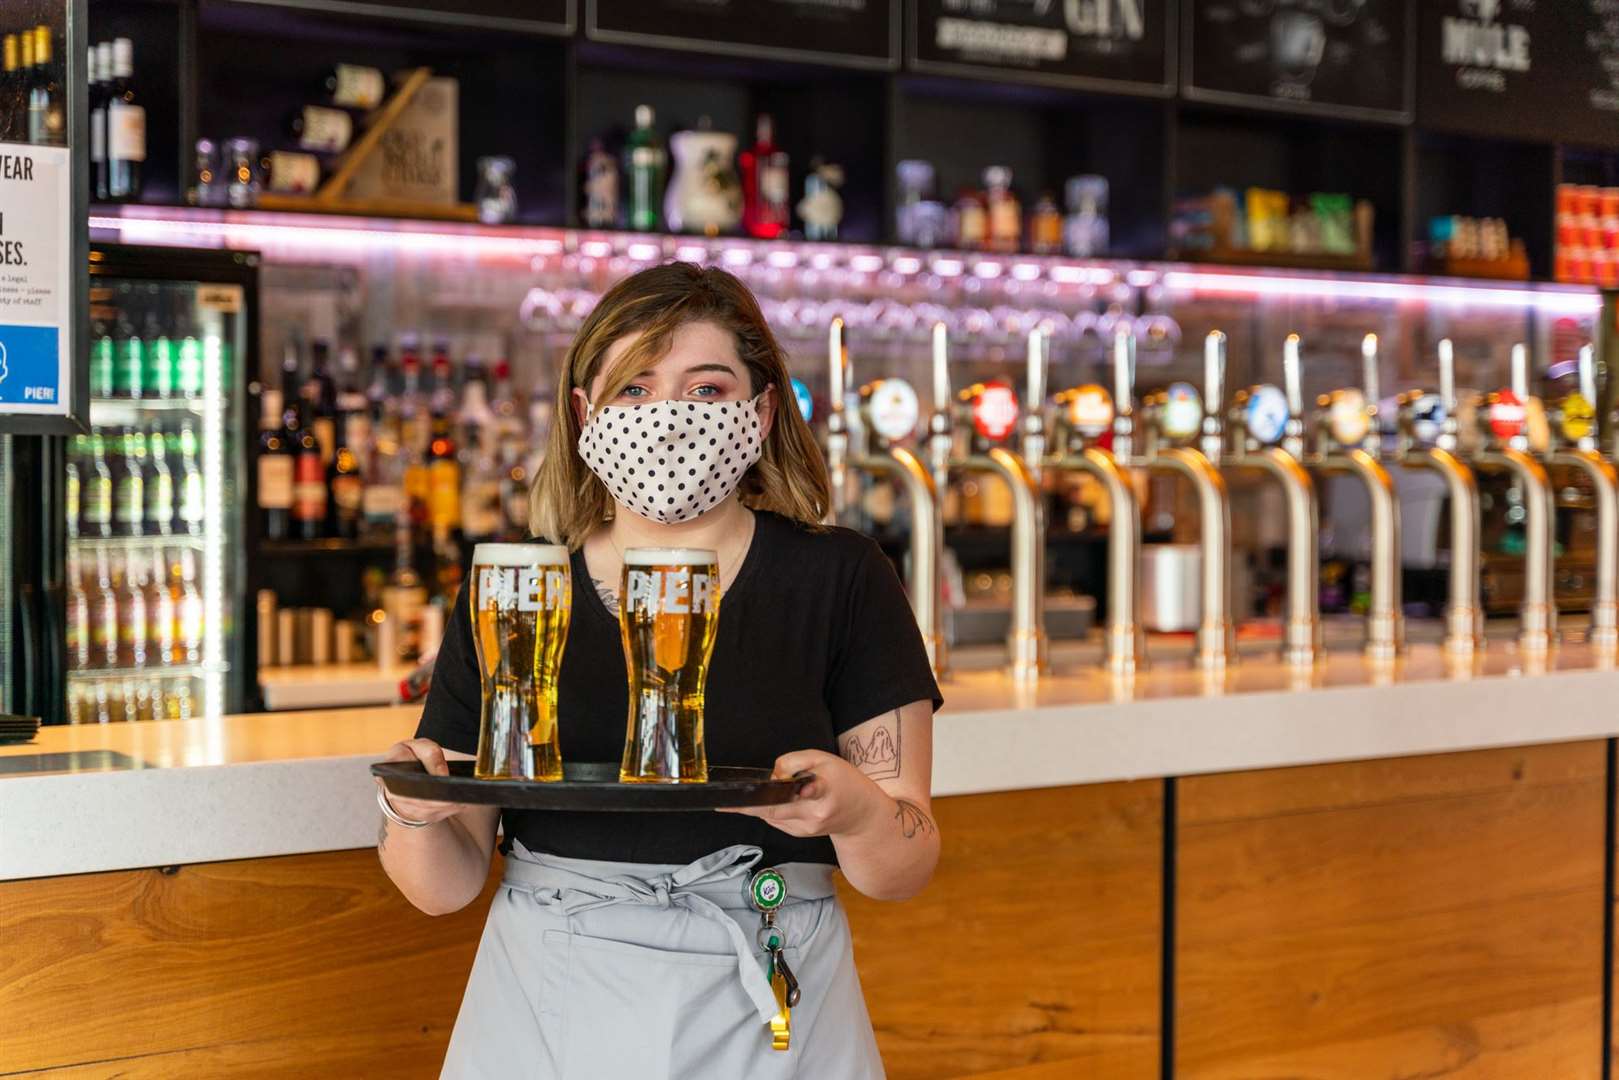 Pubs have already been hit hard by the lockdowns - now they face cancellations at their most profitable time of the year. Picture: Shepherd Neame